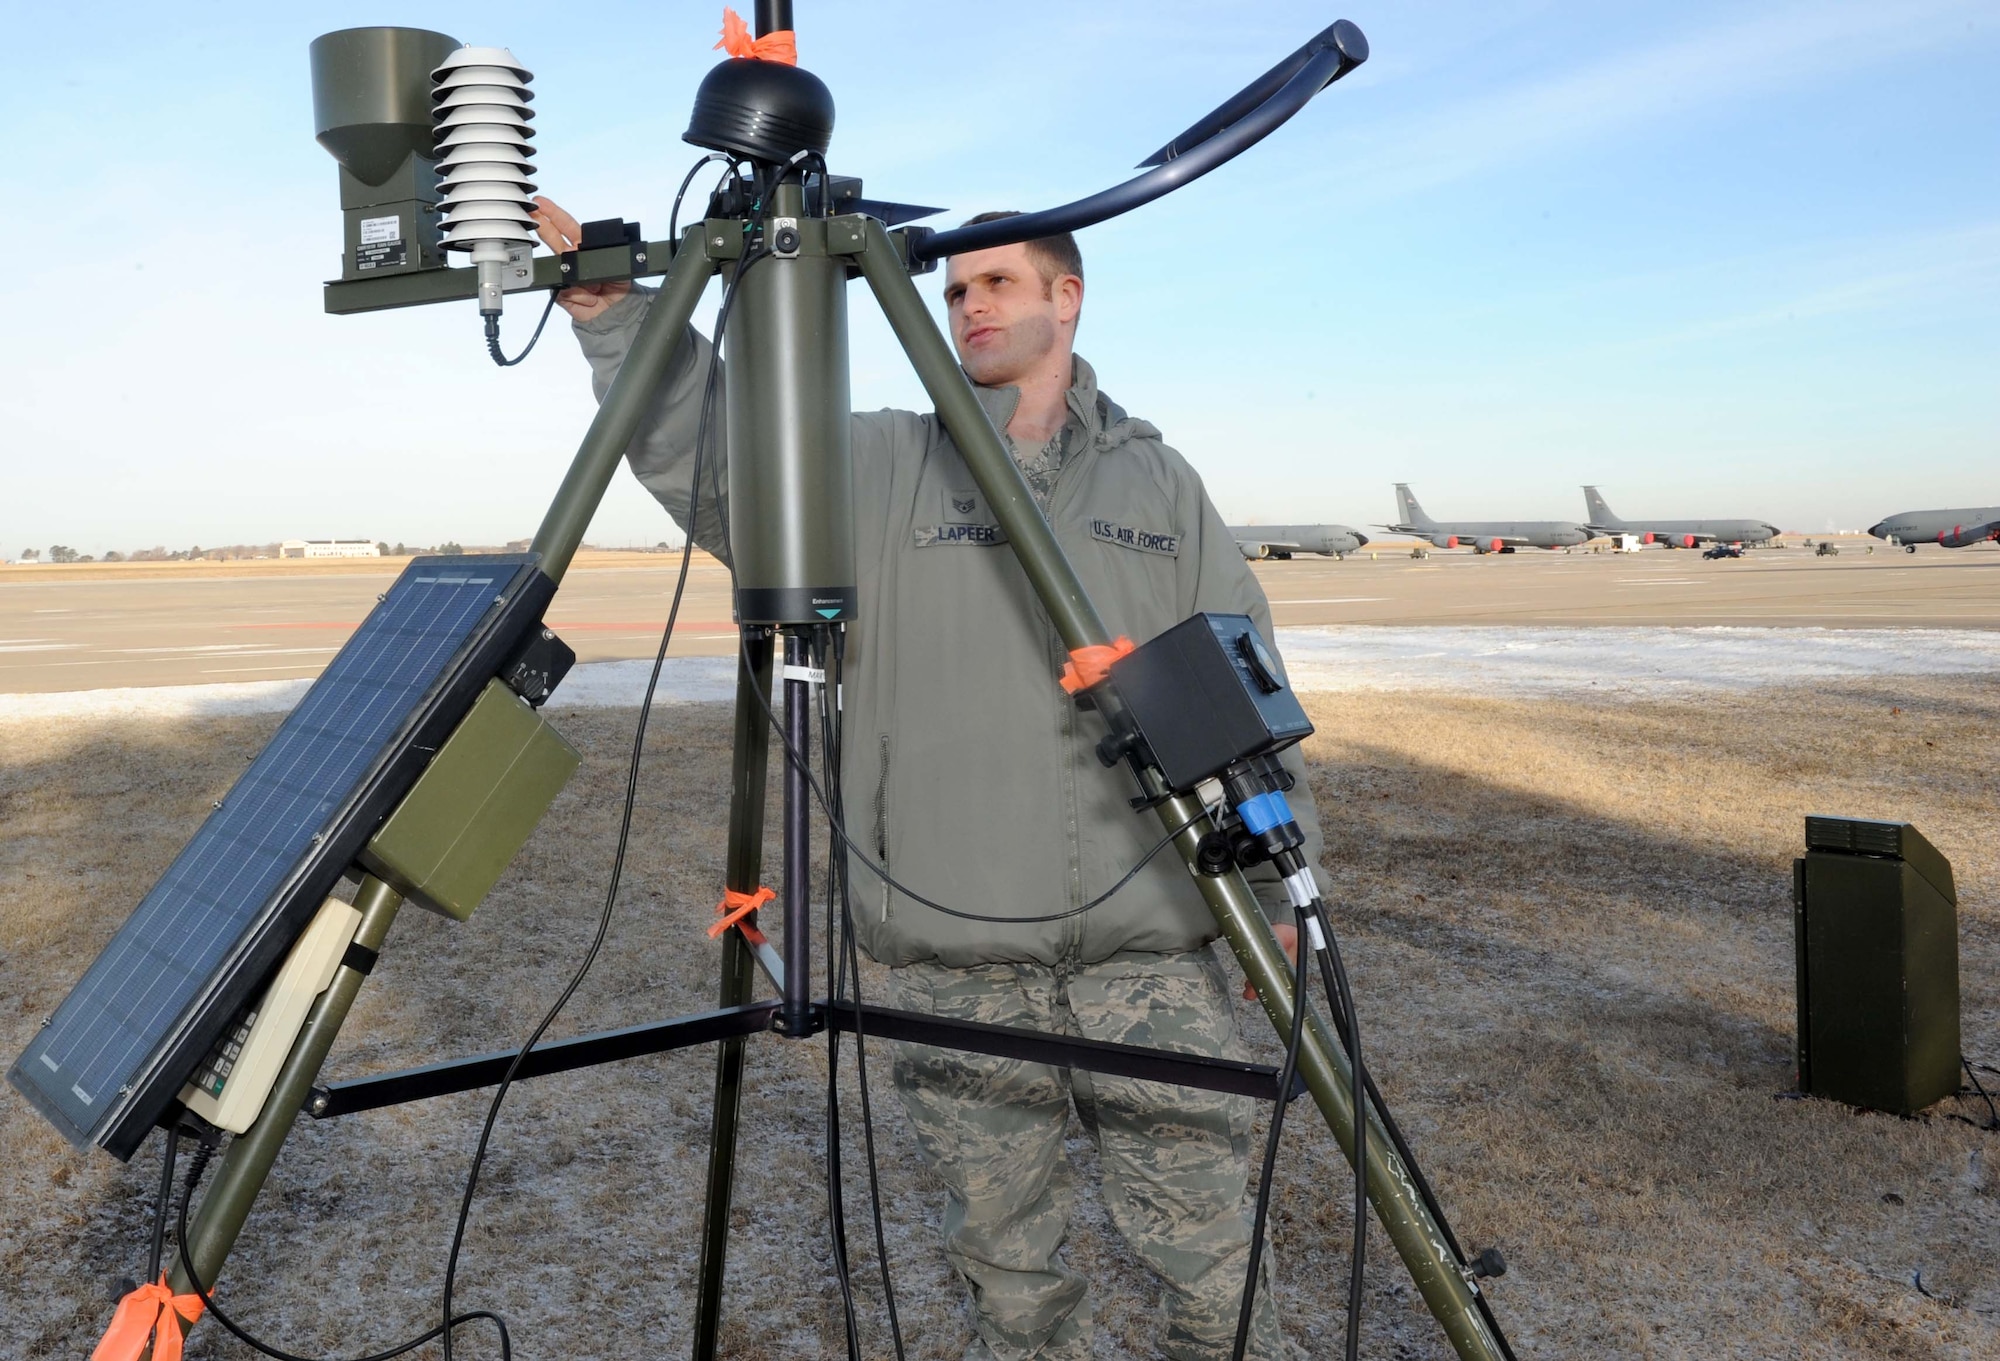 Staff Sgt. Tom Lapeer, 22nd Operation Support Squadron weather forecaster, checks the gages on a tactical weather observing system, Feb. 5, at McConnell Air Force Base, Kan. The observing system is one of many tools 22nd OSS meteorologists use to forecast weather in order to keep McConnell’s personnel and equipment safe. (U.S. Air Force photo/Airman 1st Class Tara Fadenrecht)